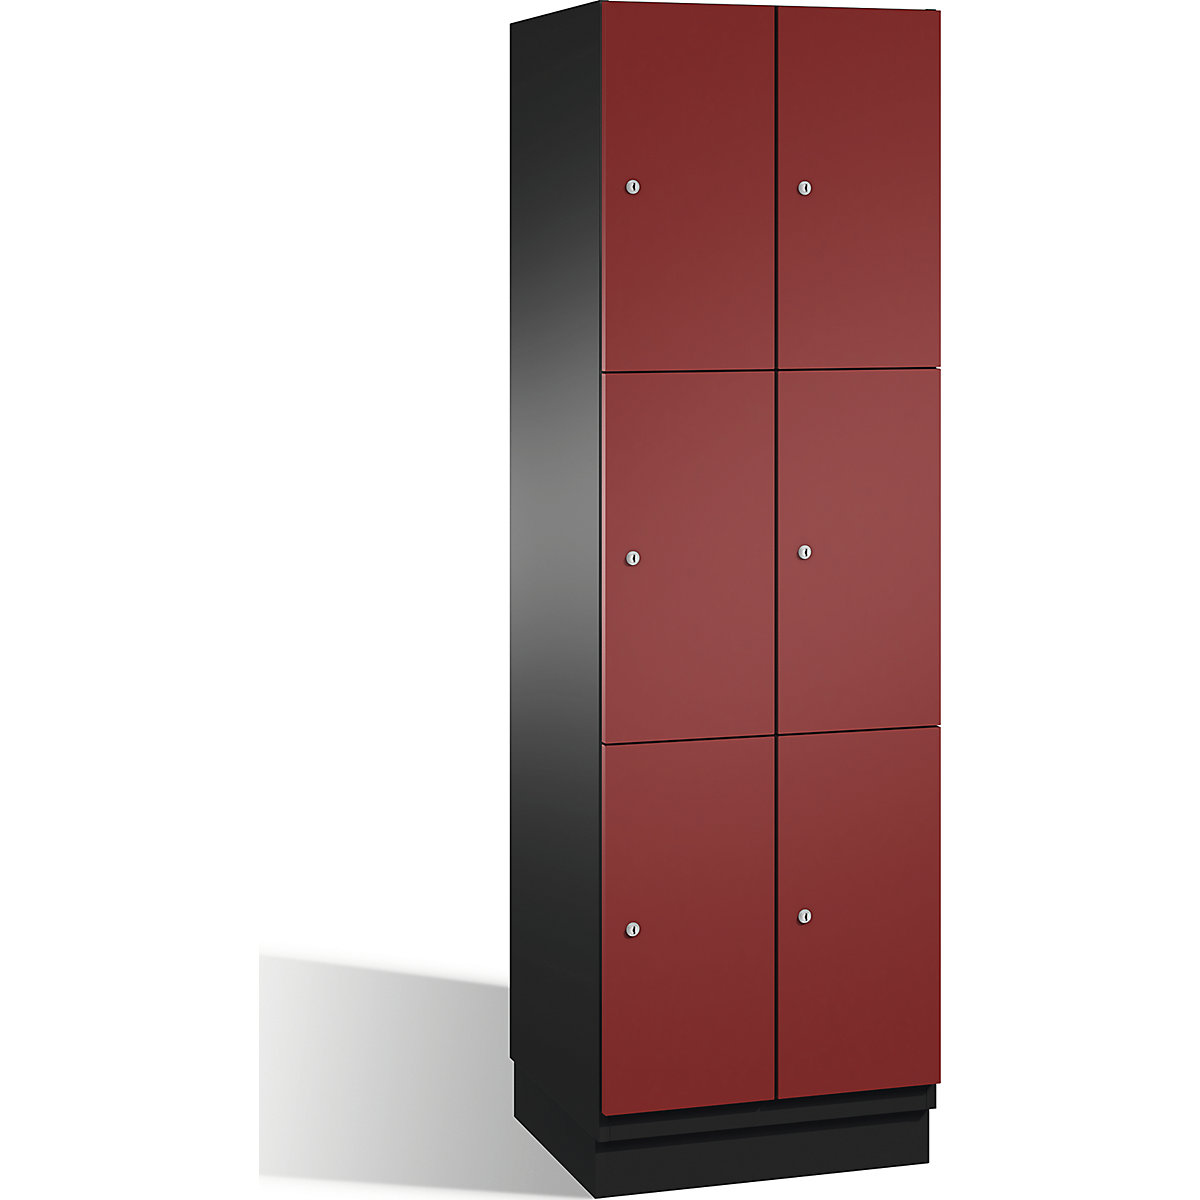 CAMBIO compartment locker with sheet steel doors – C+P, 6 compartments, width 600 mm, body black grey / door ruby red-10